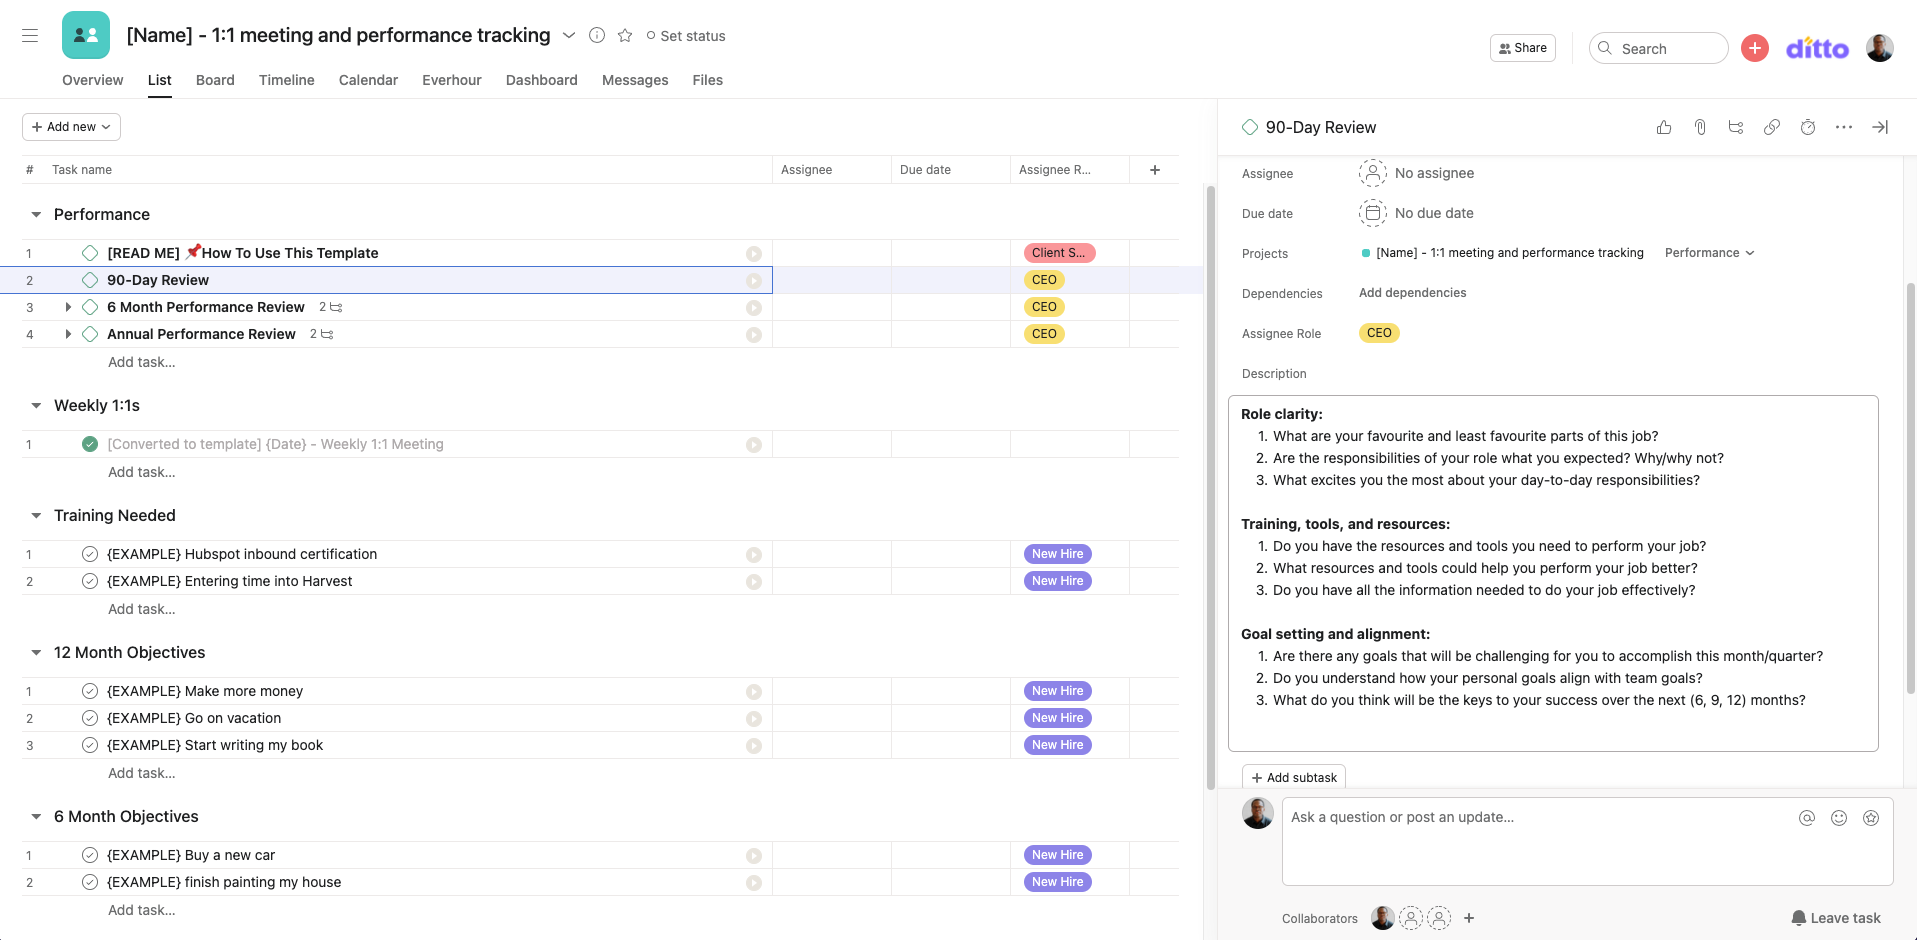 11 meeting and performance tracking agenda [template] Best Asana